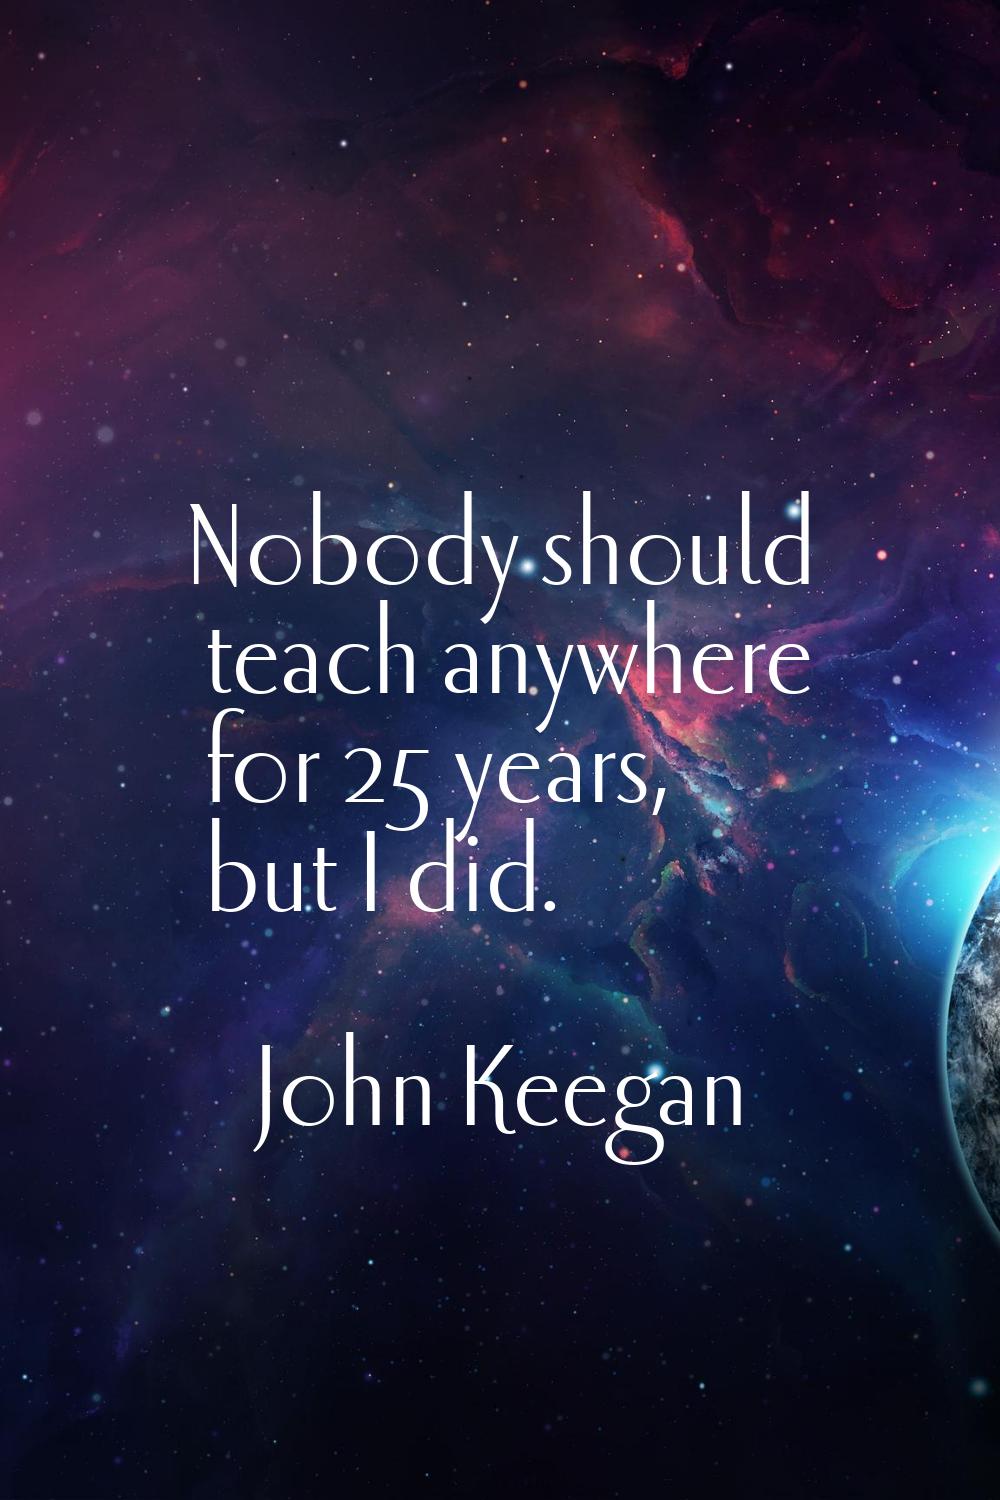 Nobody should teach anywhere for 25 years, but I did.